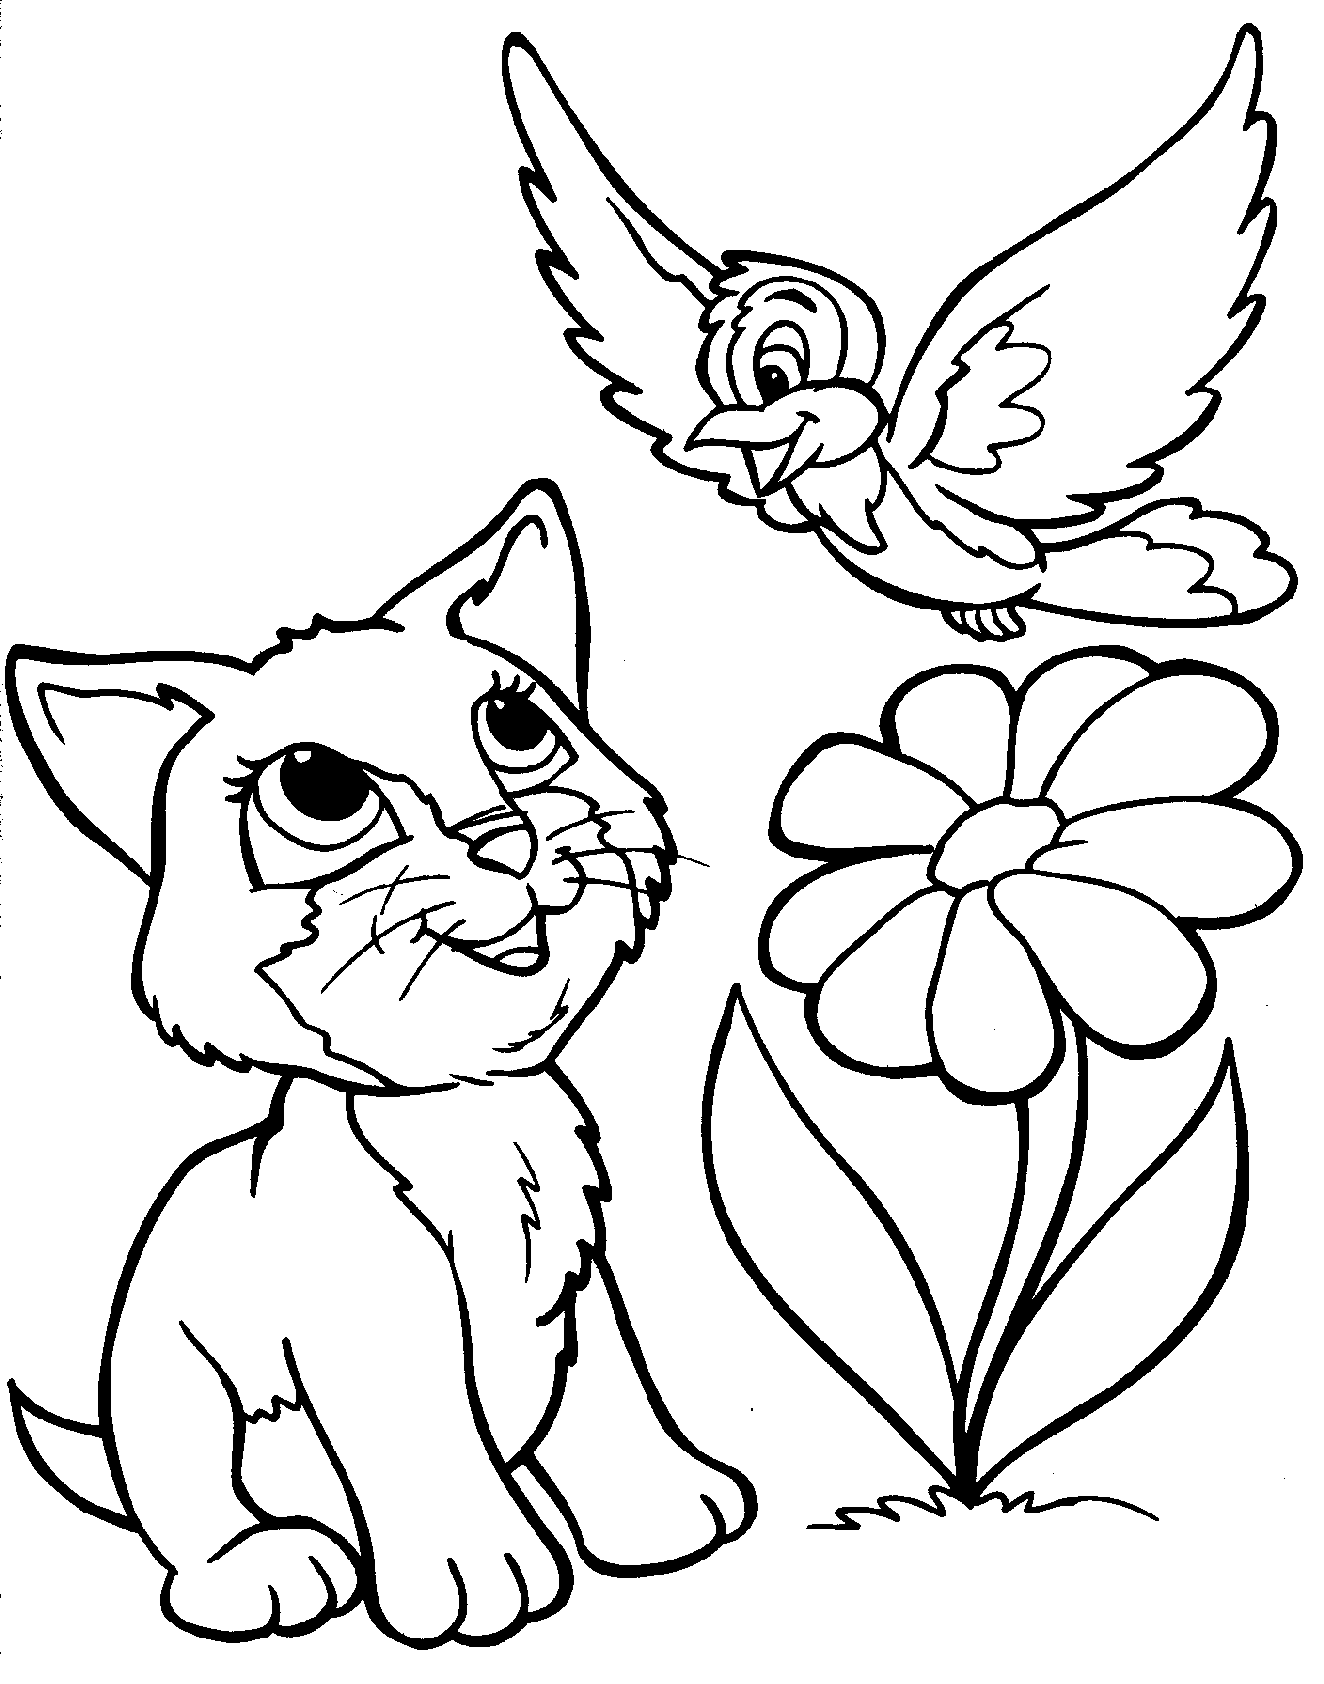 Printable Cat Pictures To Color - Printable Blank World